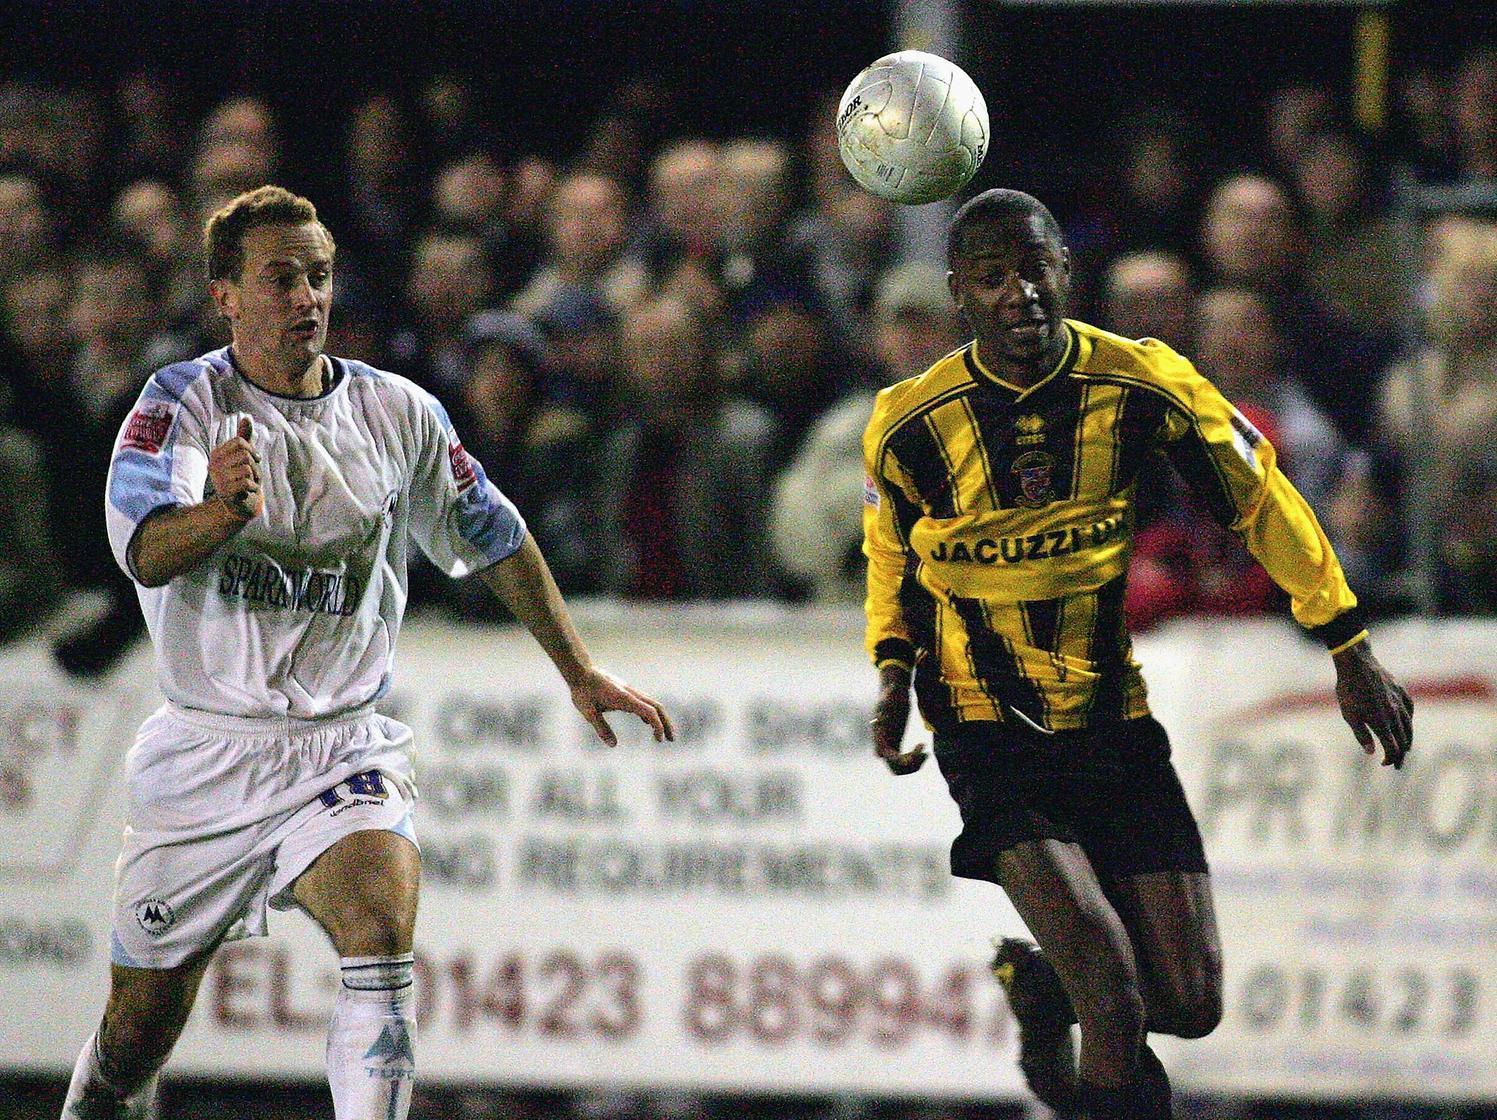 Gareth Grant chases down the ball.